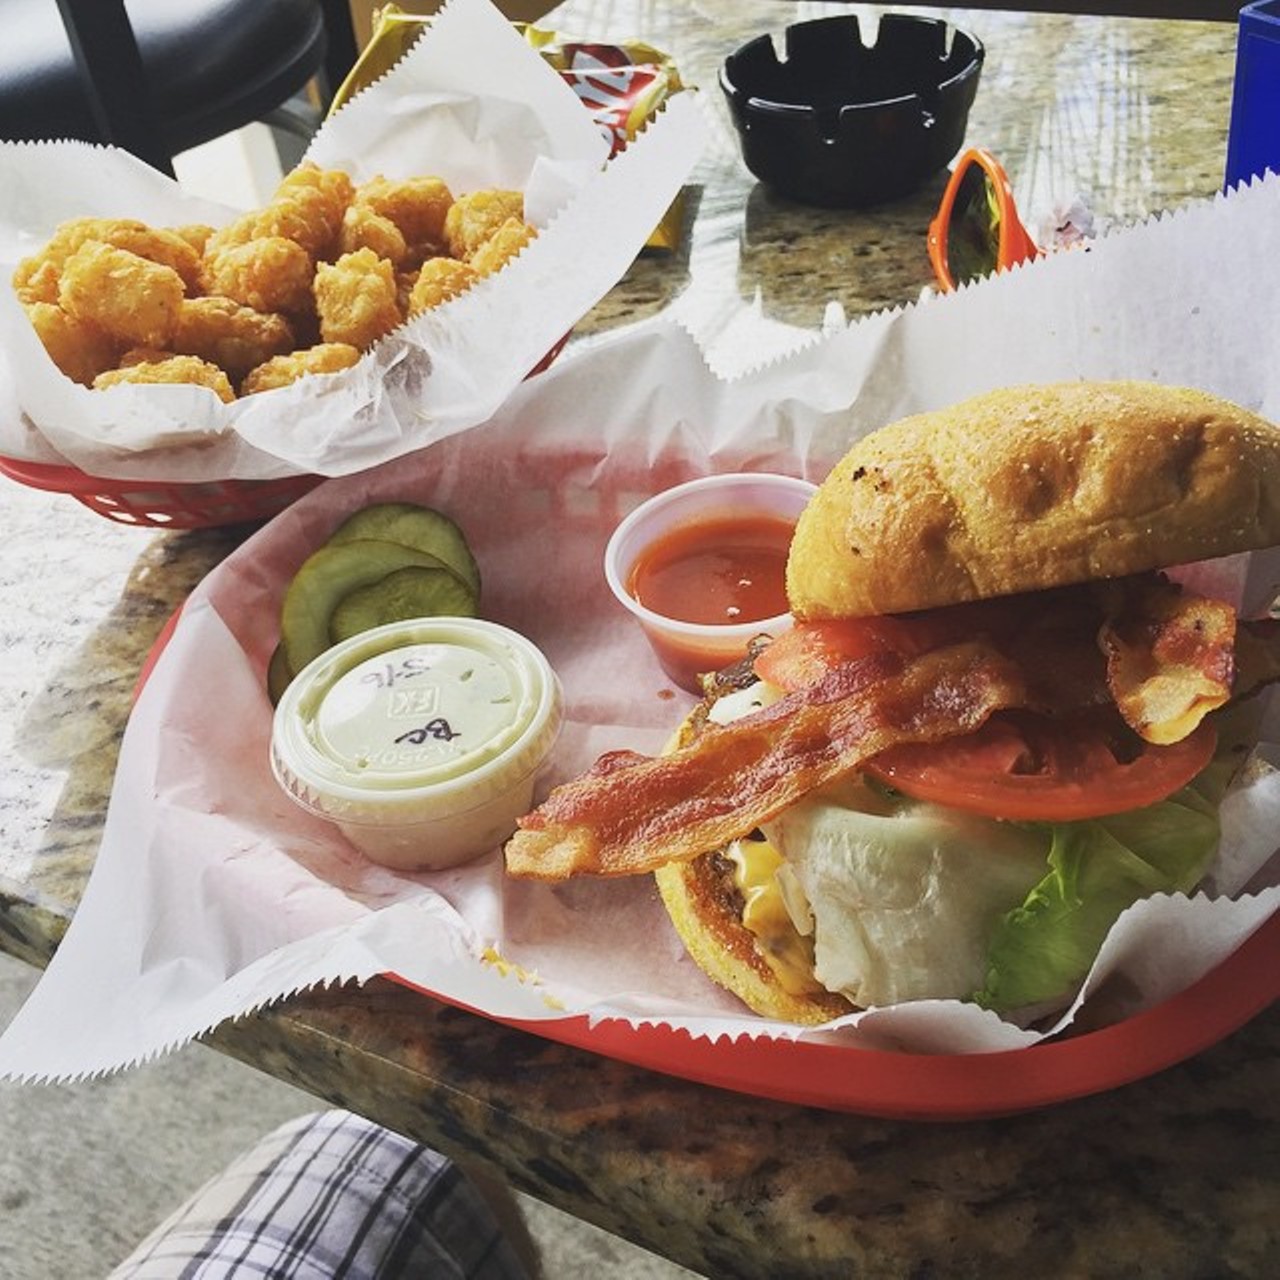 Hideaway Special Burger at The Hideaway
516 Virginia Drive, 407-898-5892
The special burger has grilled onion, bacon, A-1 sauce and melted American cheese. It tastes even better with a side of tots.
Photo via lorddopey/Instagram